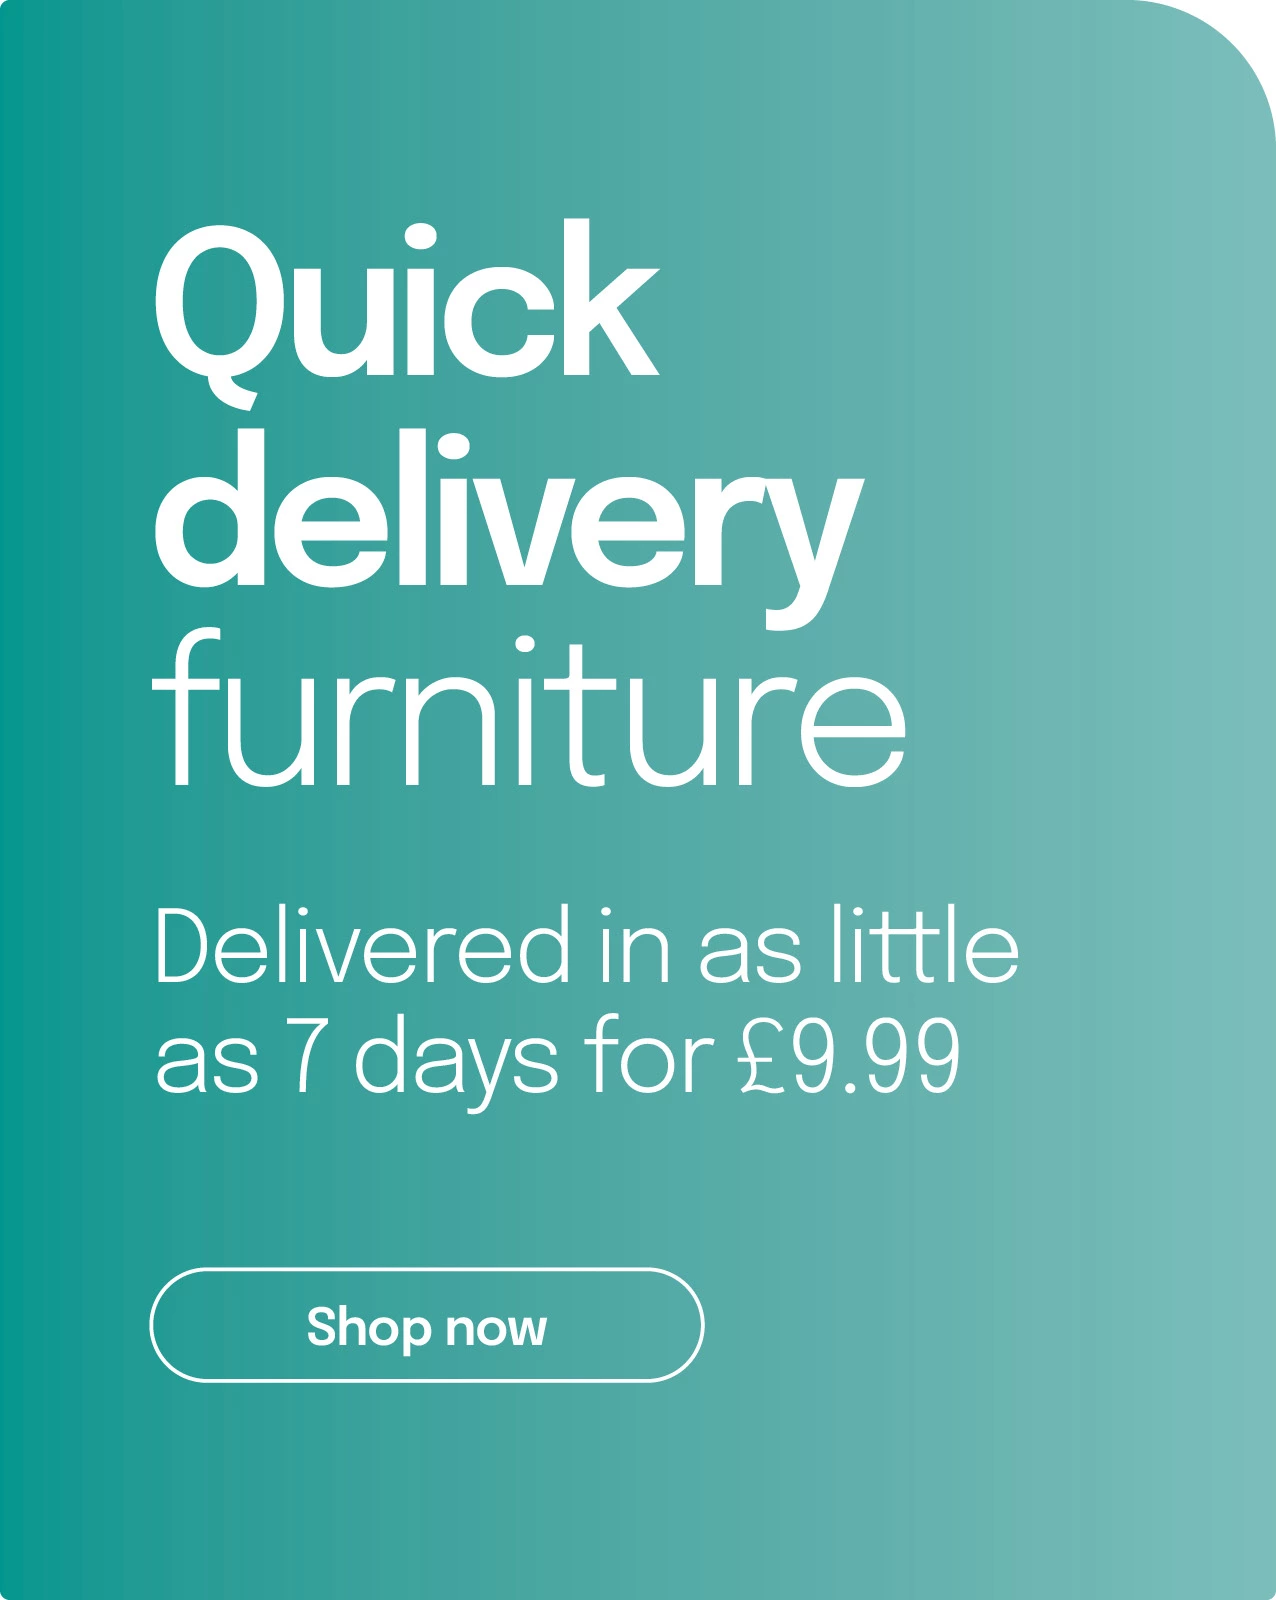 Quick Delivery Furniture, delivered in as little as 7 days for £9.99 - shop now